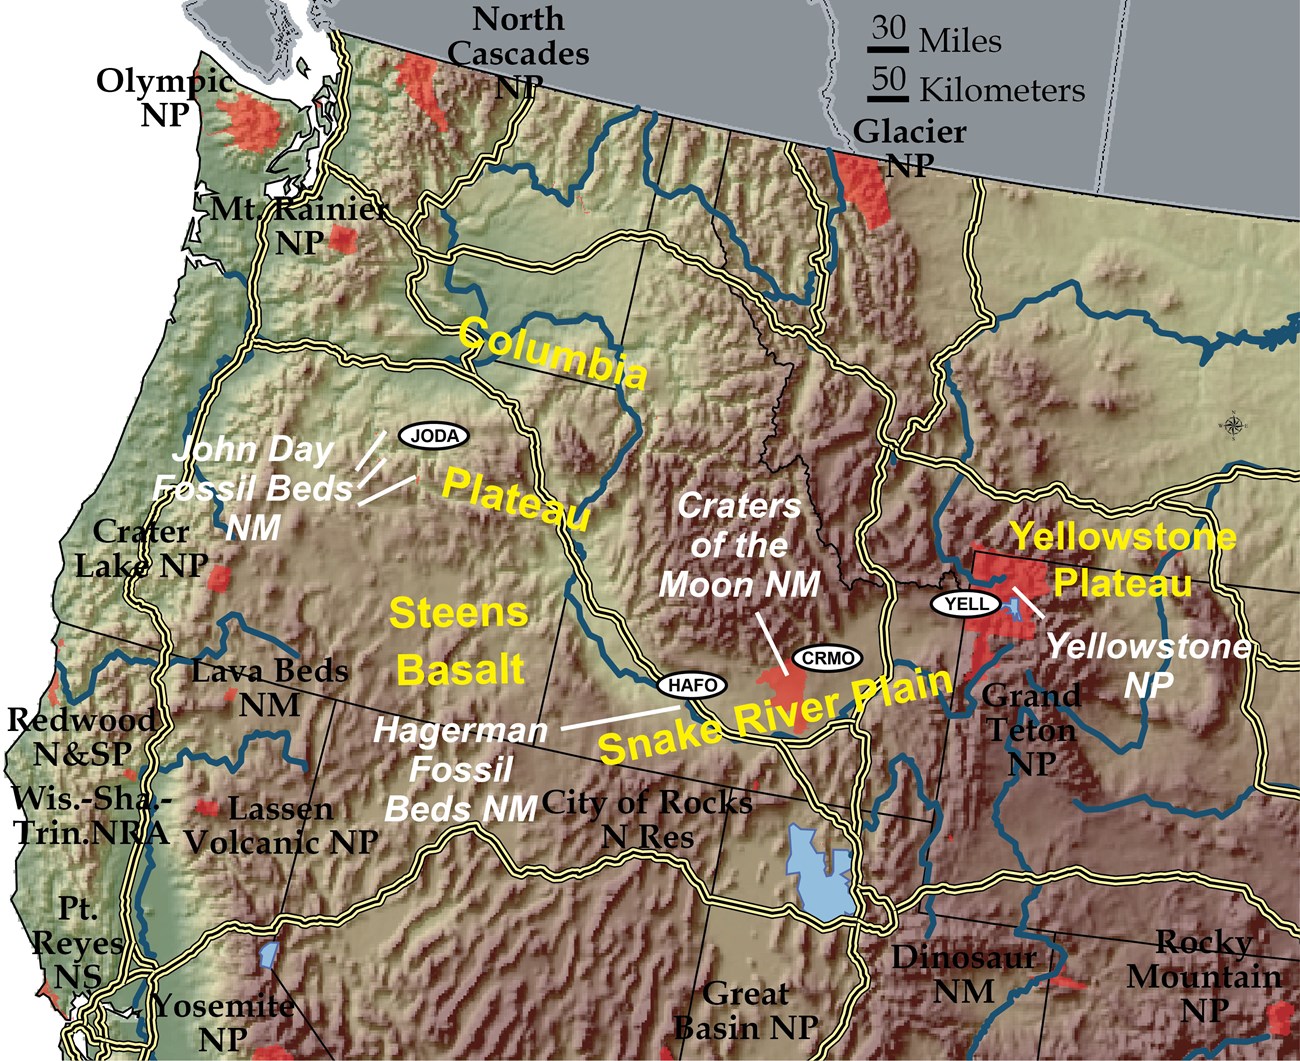 shaded relief map of pacific northwest w nps sites labeled